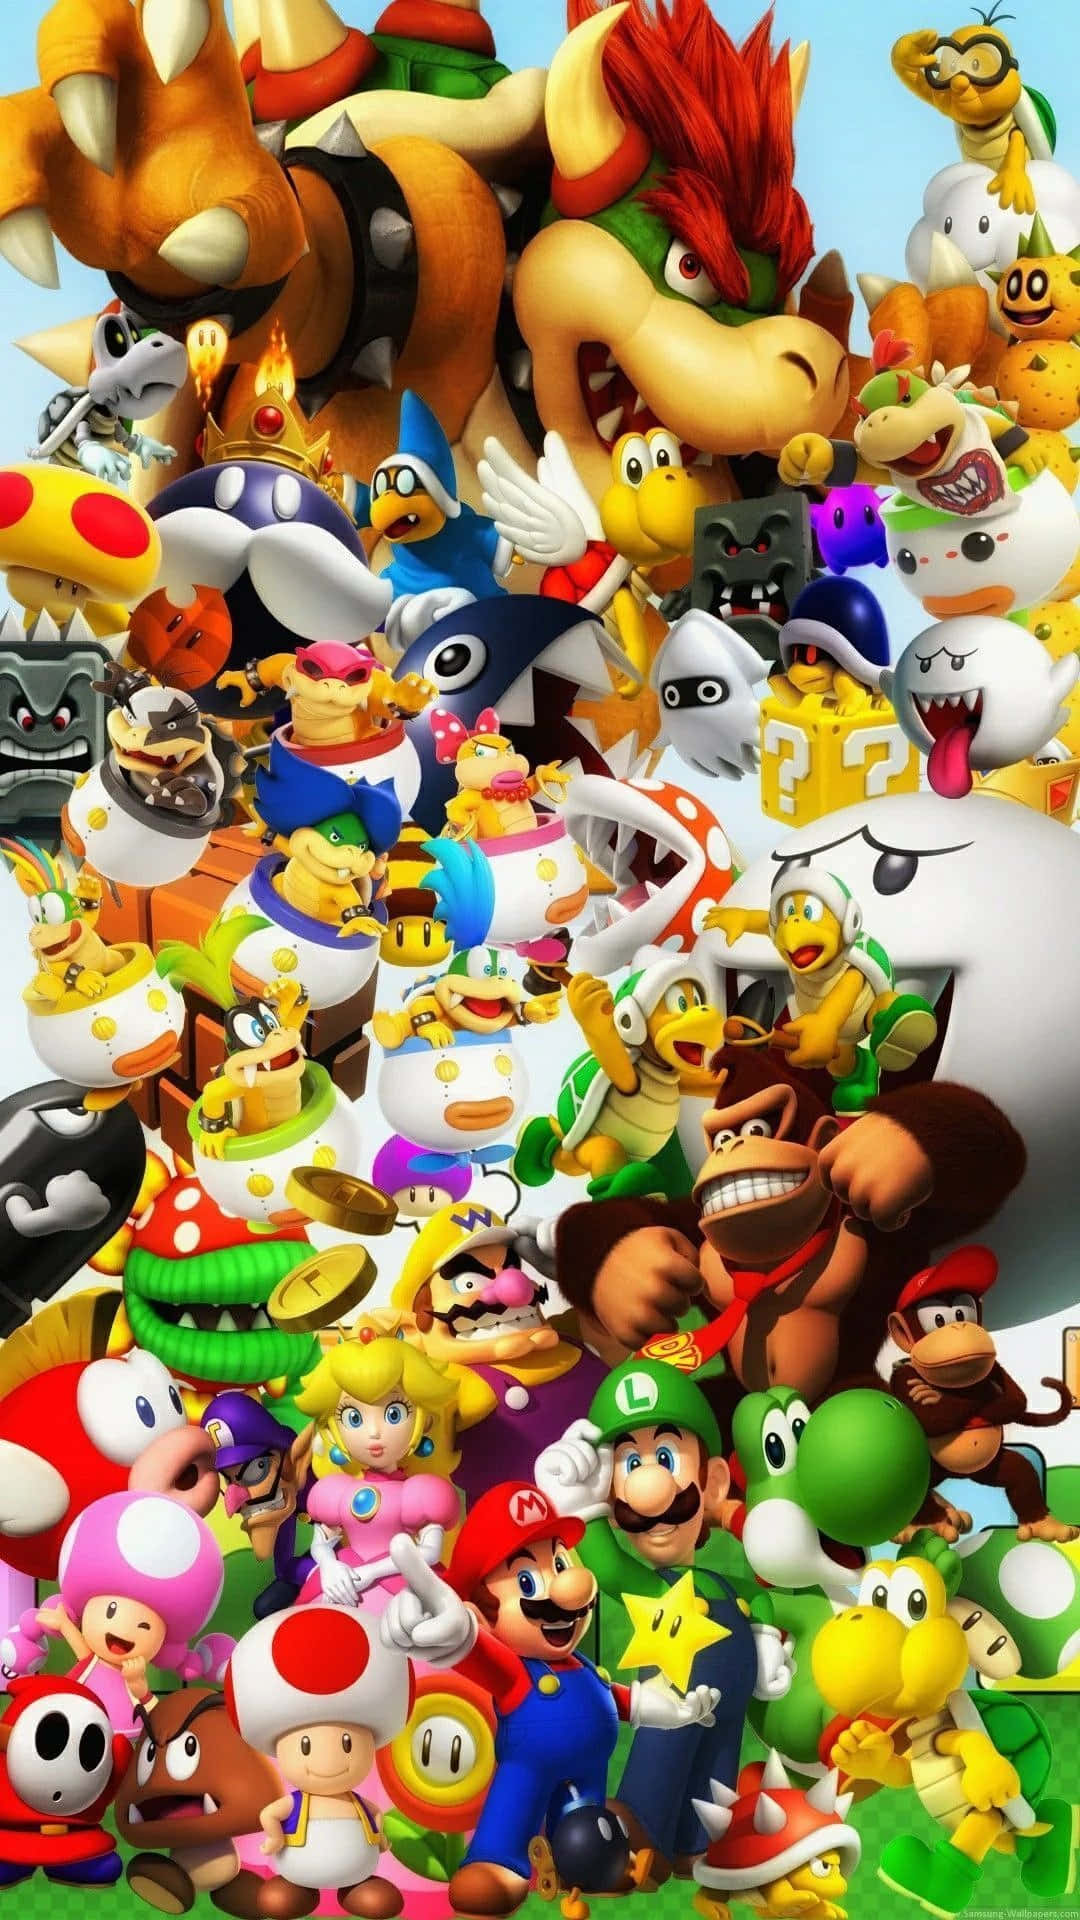 Exciting Adventure with Super Mario Characters Wallpaper